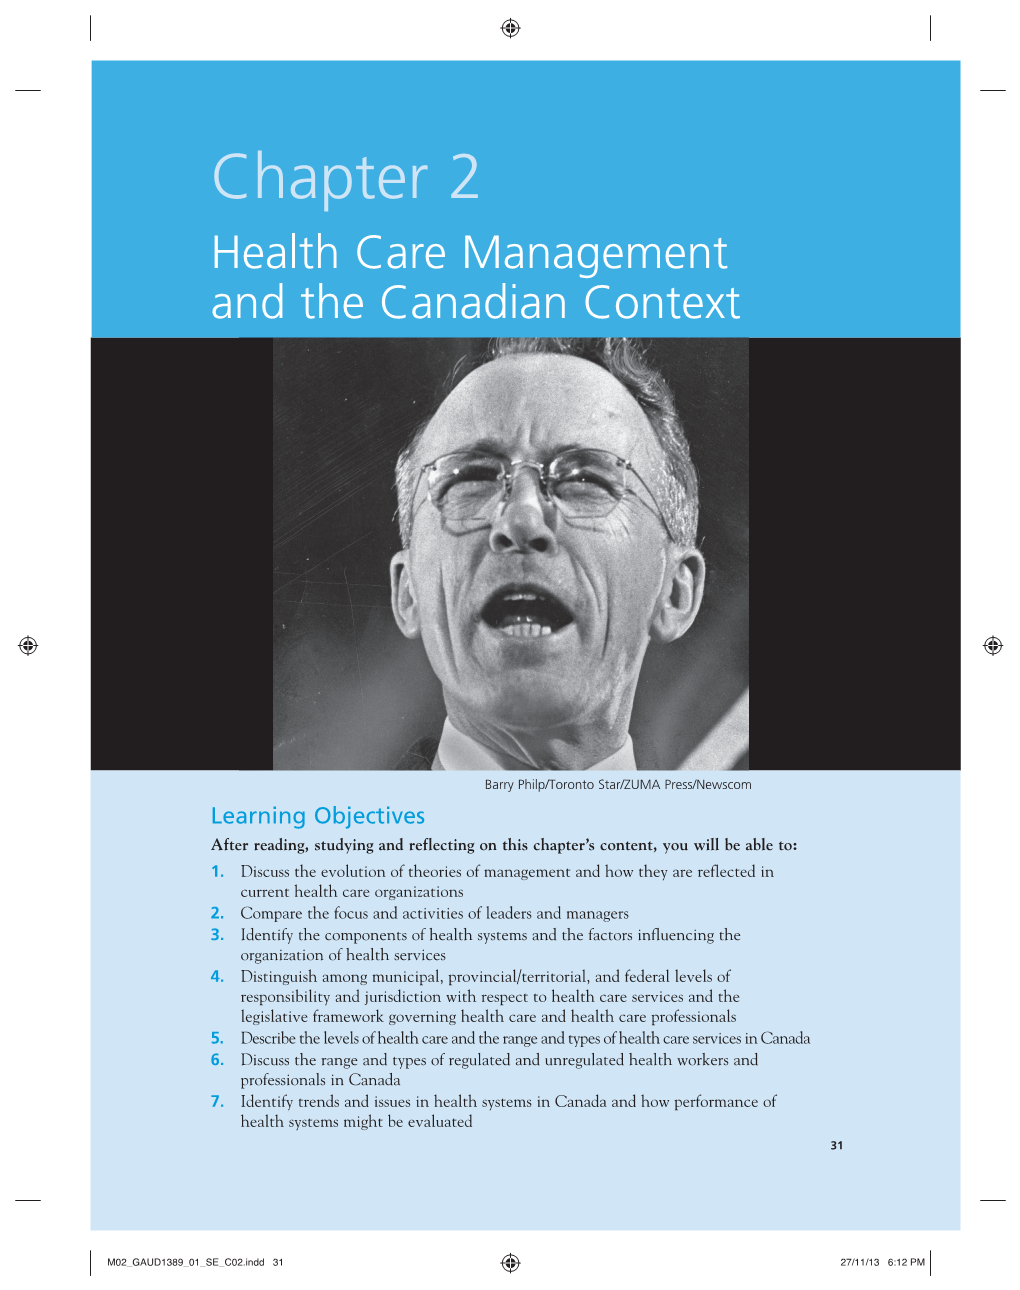 Chapter 2 Health Care Management and the Canadian Context